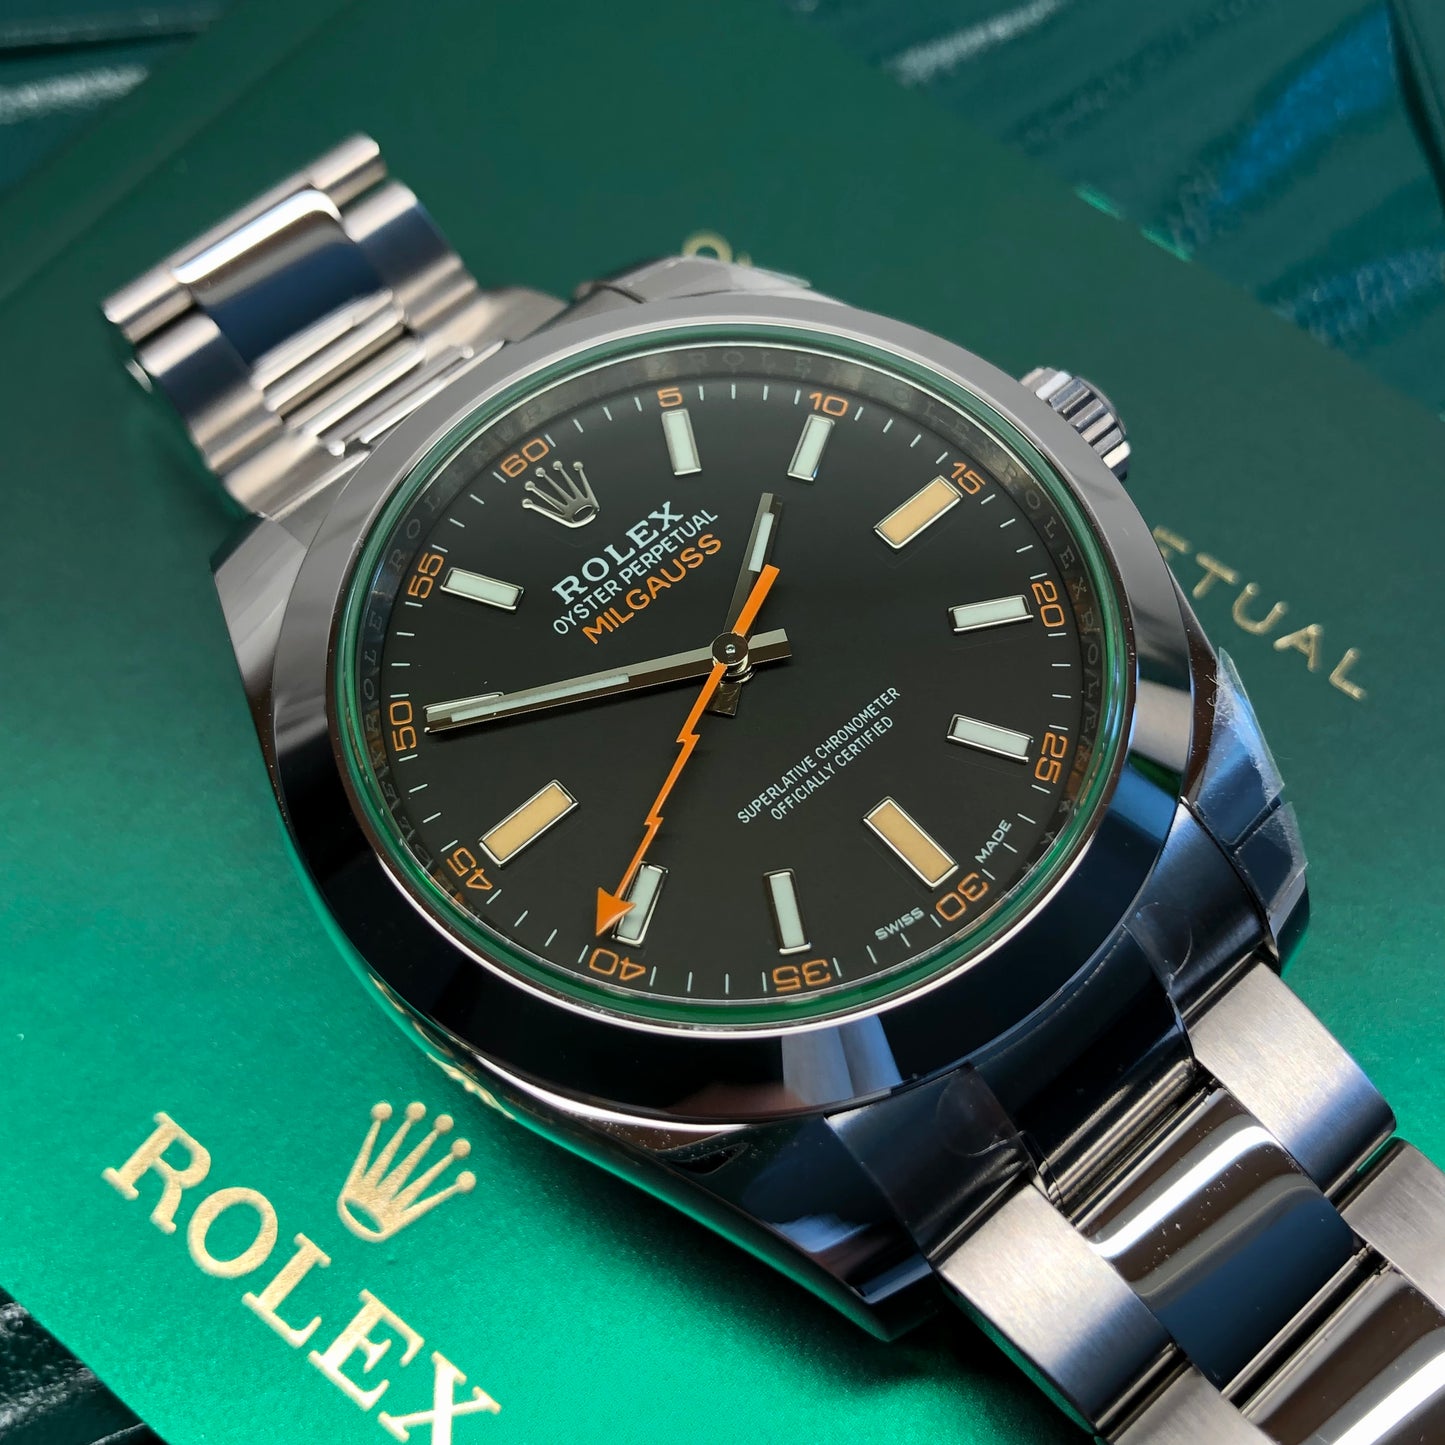 2022 Rolex Milguass 116400GV Green Steel Oyster Wristwatch with Box and Papers Unworn - Hashtag Watch Company